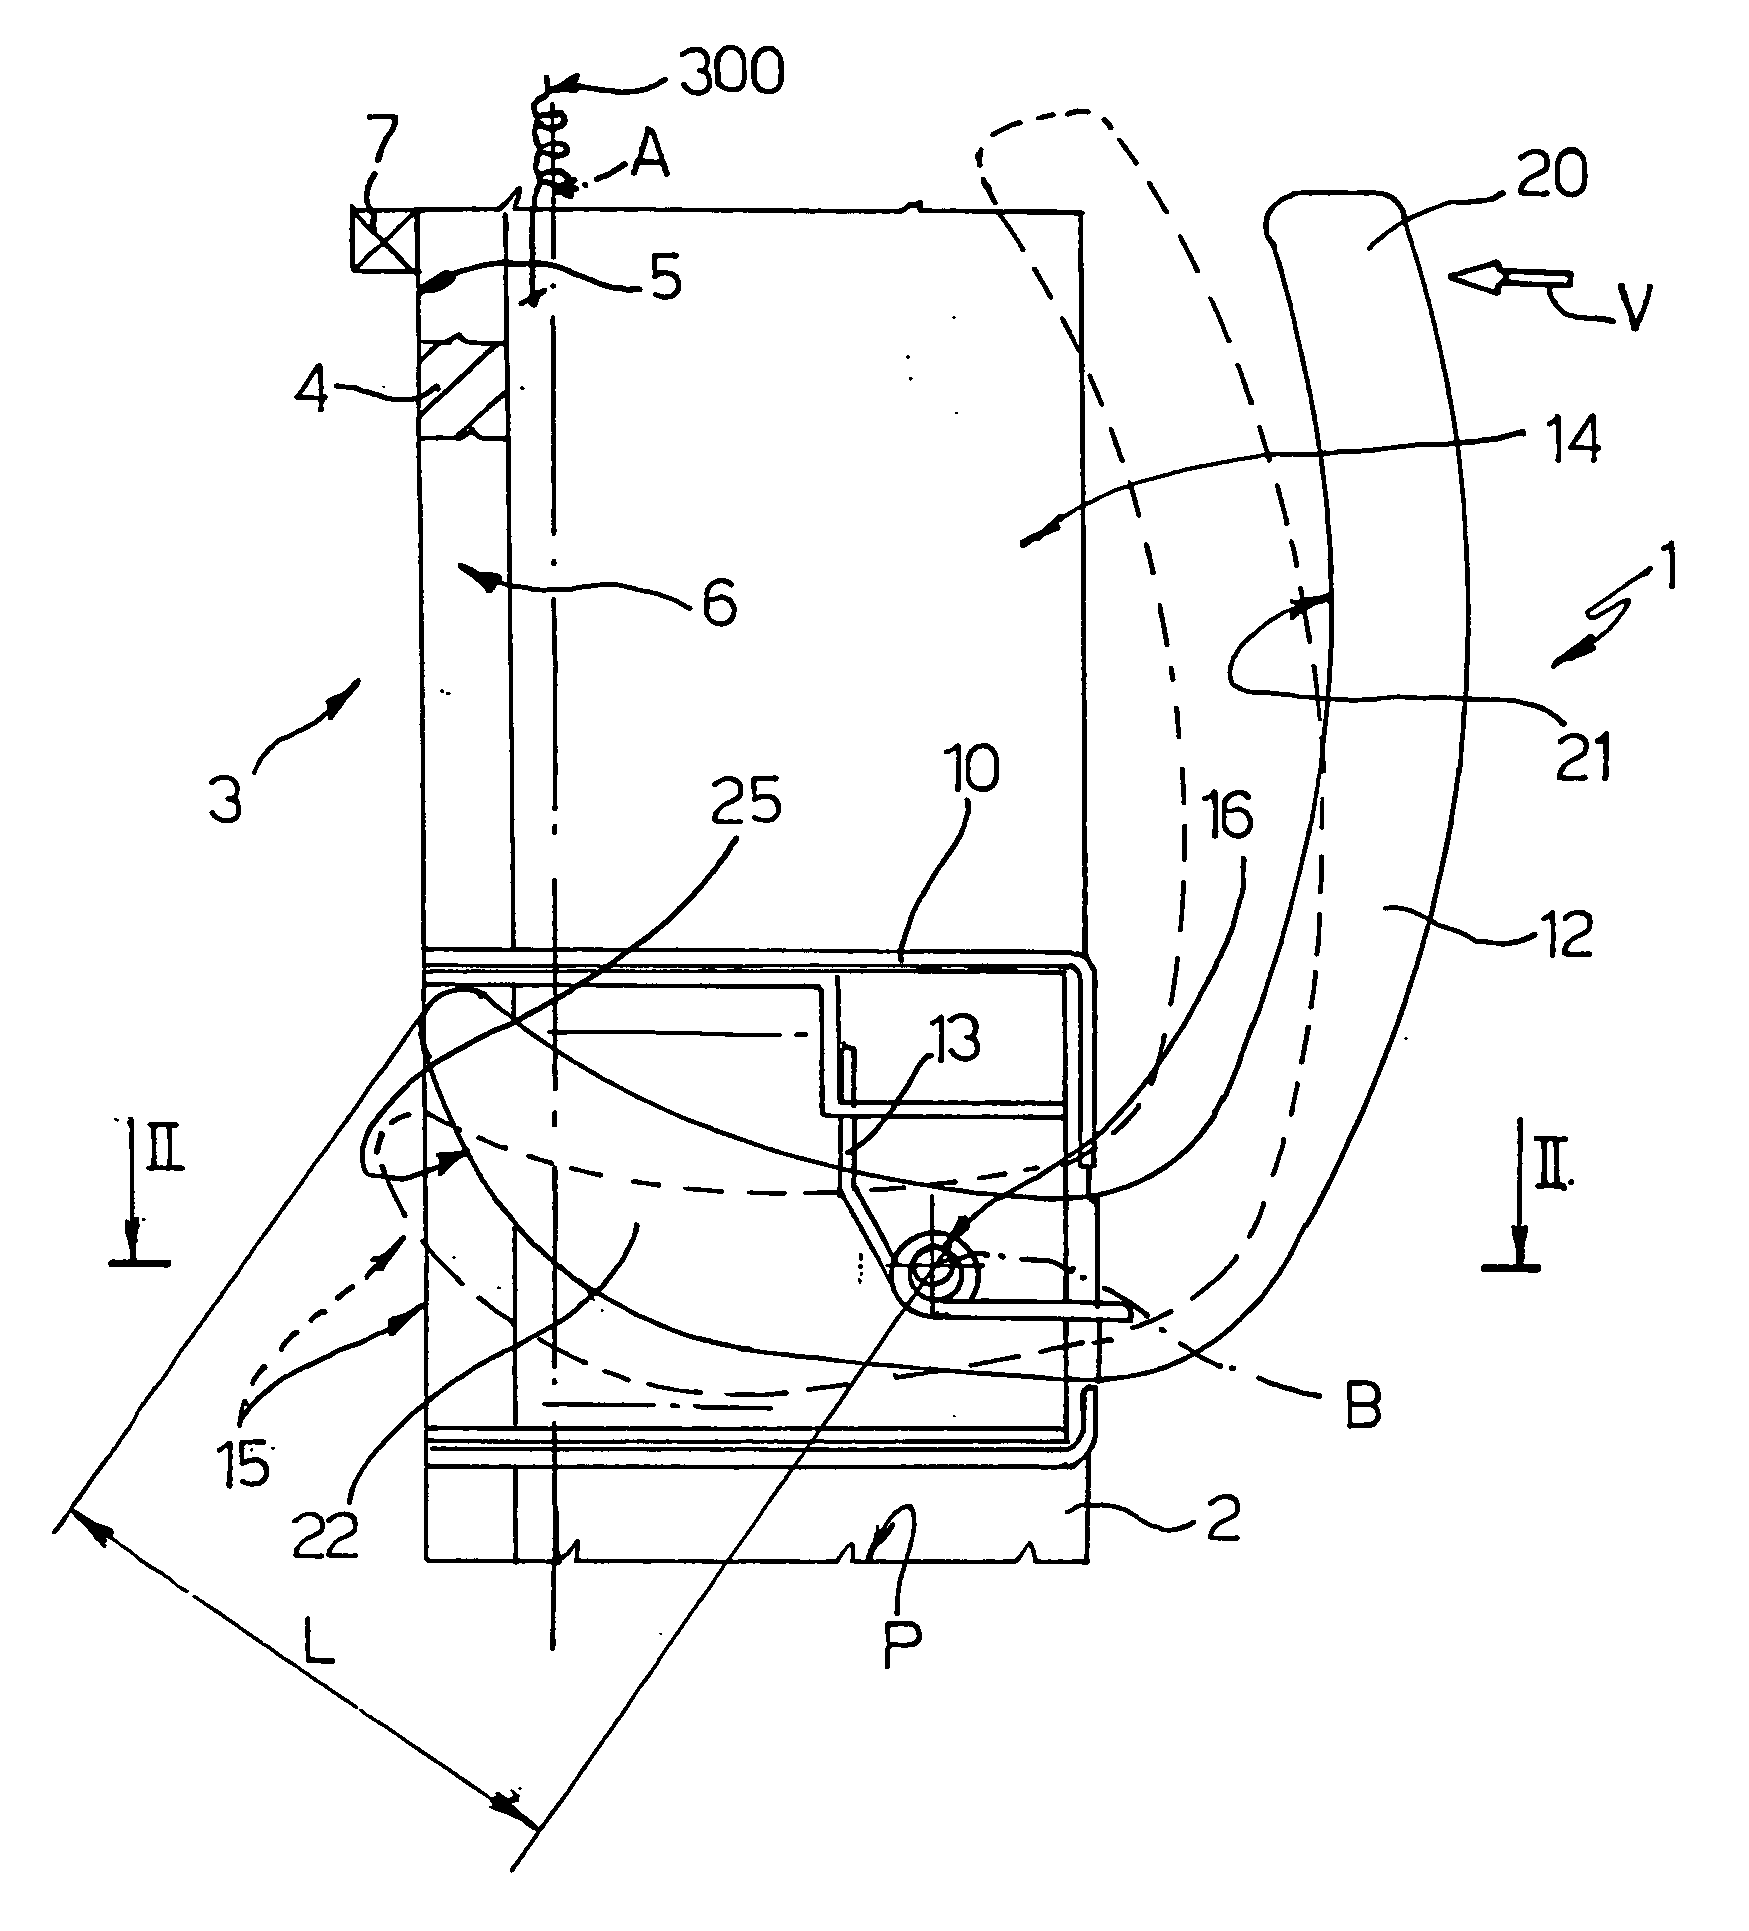 Handle opening device for a door of an electric household appliance, in particular a refrigerator or freezer